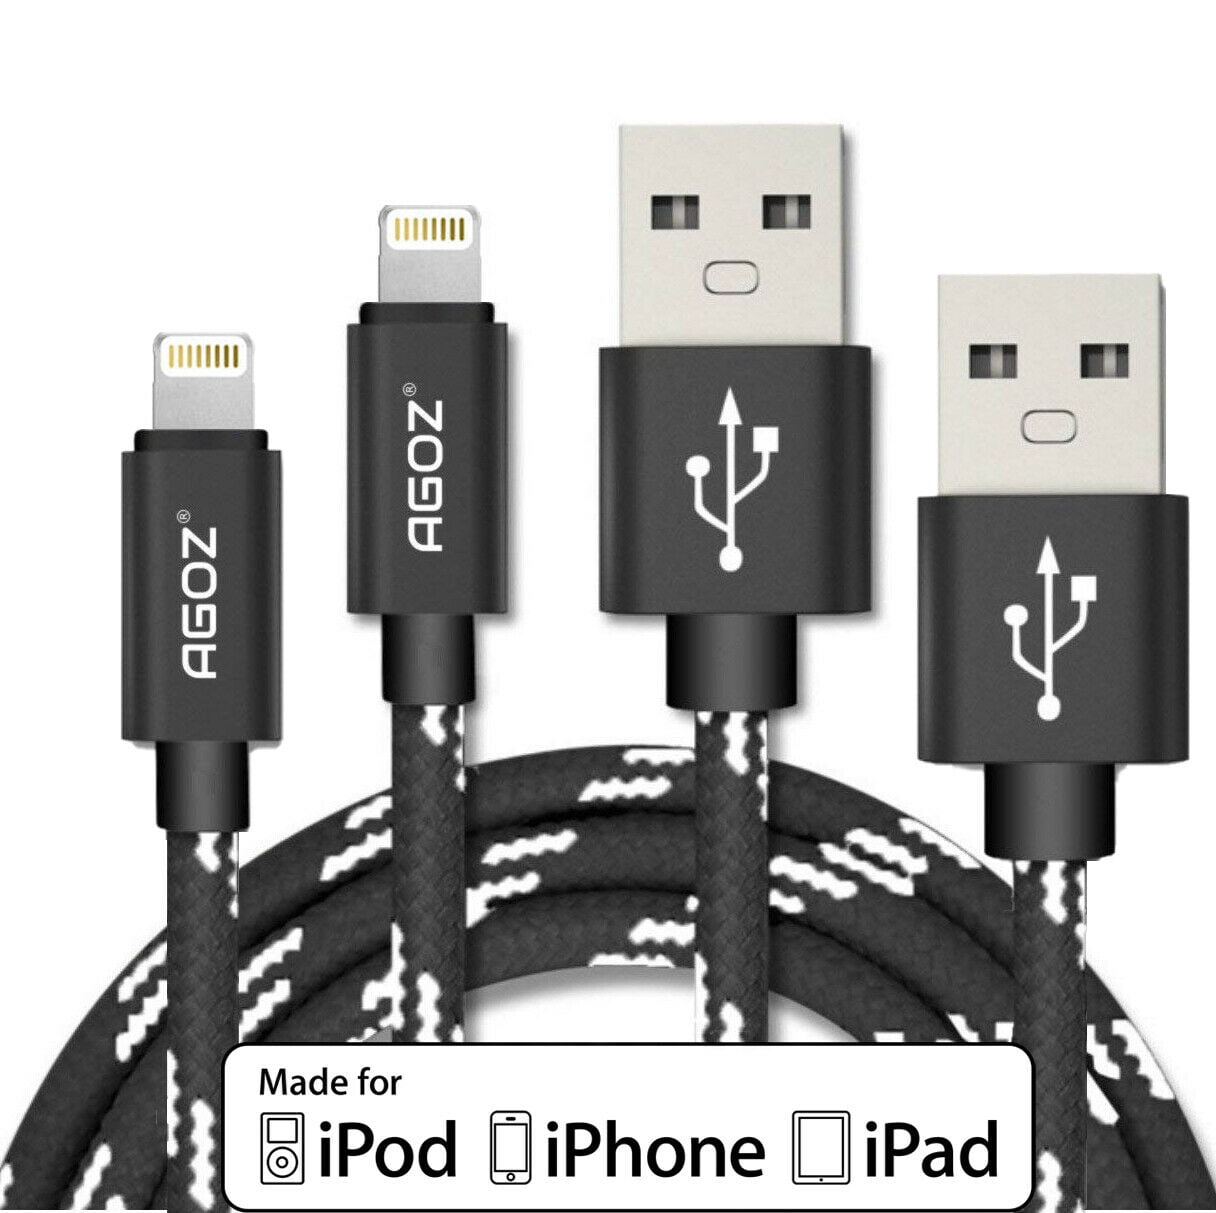 MFi Certified Lightning Cable Braided iPhone Lead Fast Charging Cable for iPhone 12 Pro Max Mini 11 Pro XR XS X 10 8 7 6s 6 Plus 5s 5 SE 2020 iPhone Charger,Aioneus iPhone Charger Cable 2Pack 2M+2M